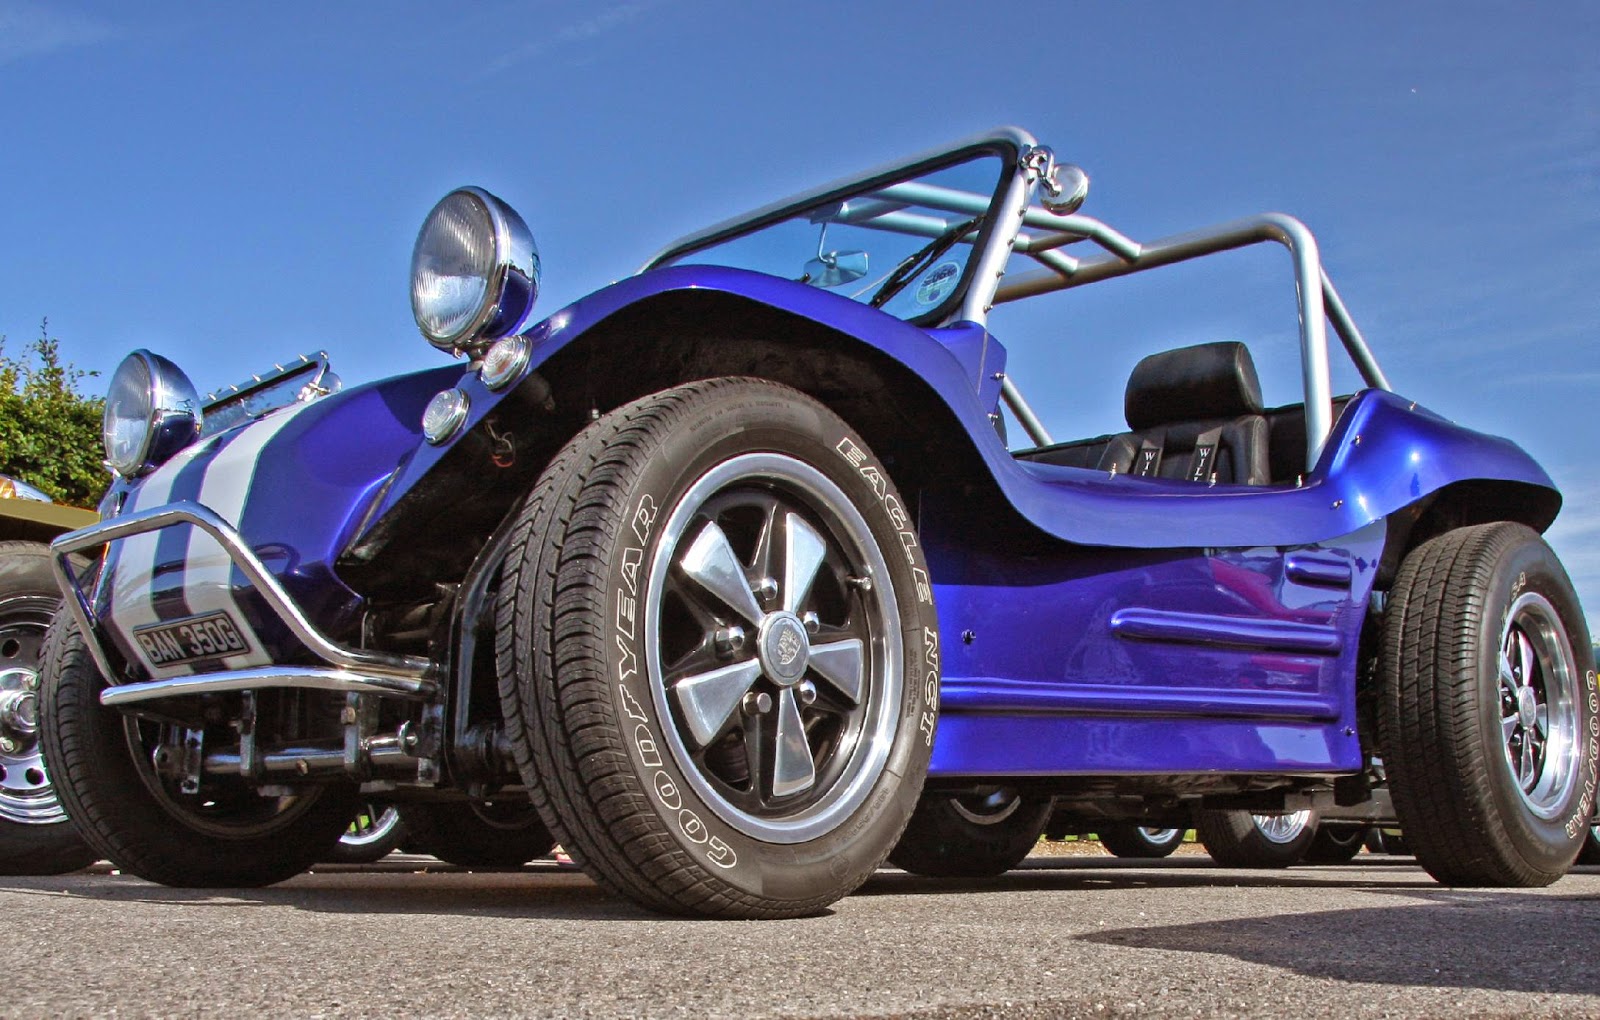 File:Beach buggy   Flickr   exfordy (1)   Wikimedia Commons